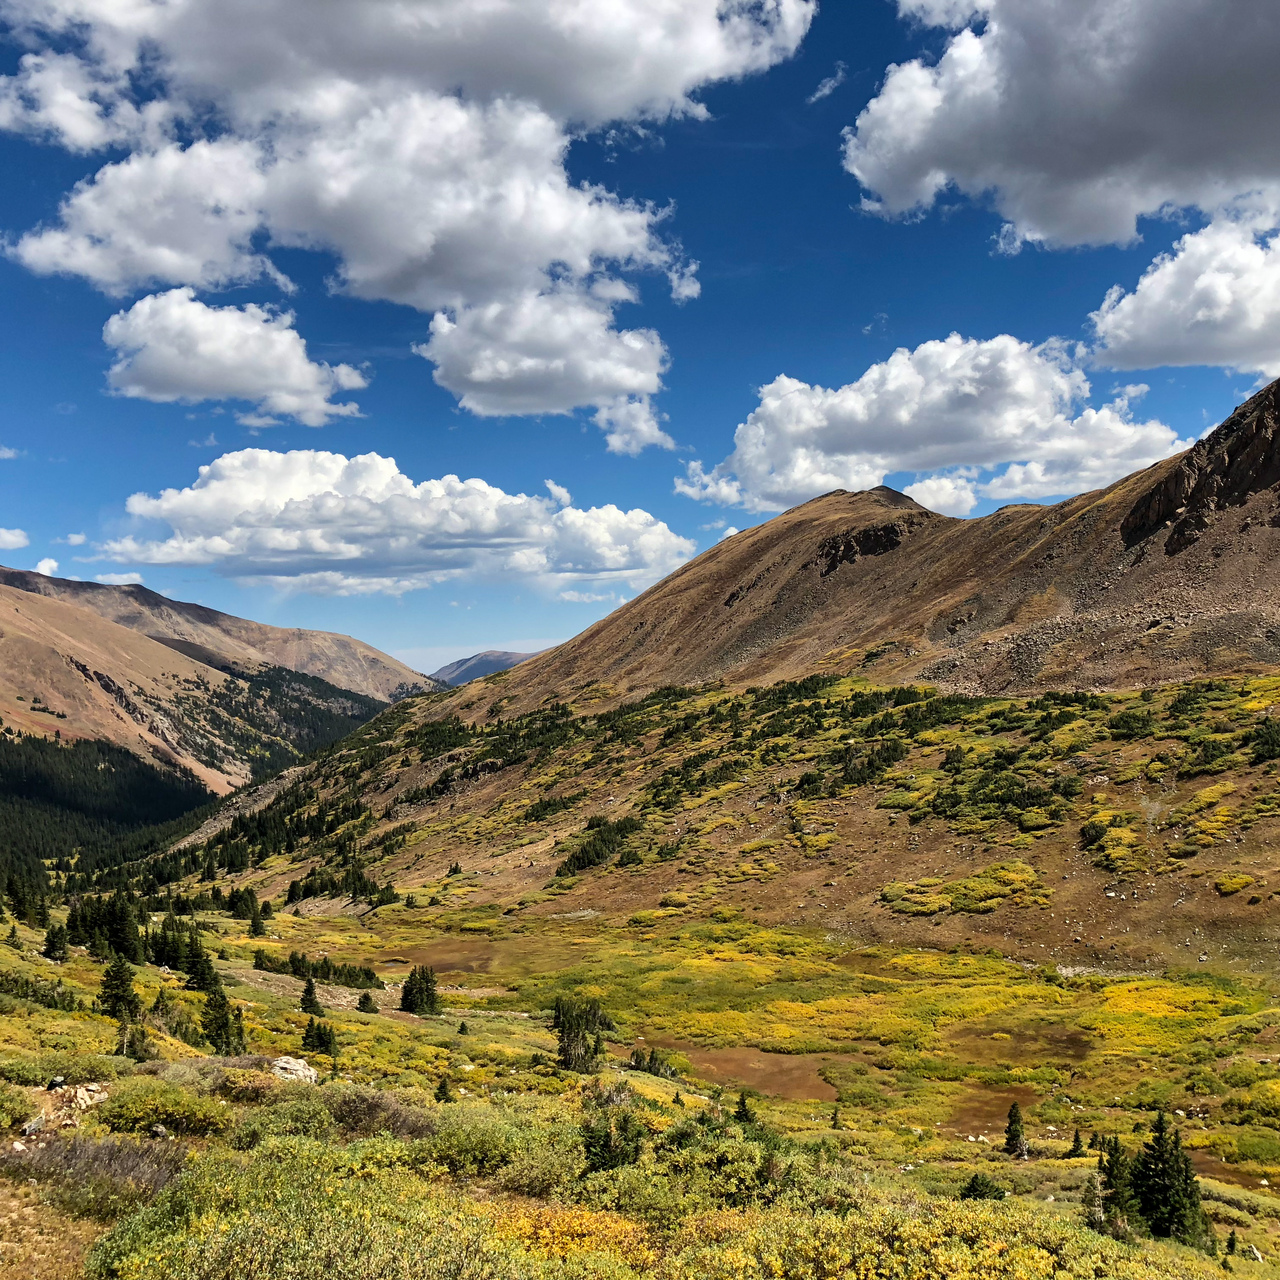 2018-herman-gulch - Looking down from where I came. Herman Gulch, Colorado. September, 2018.